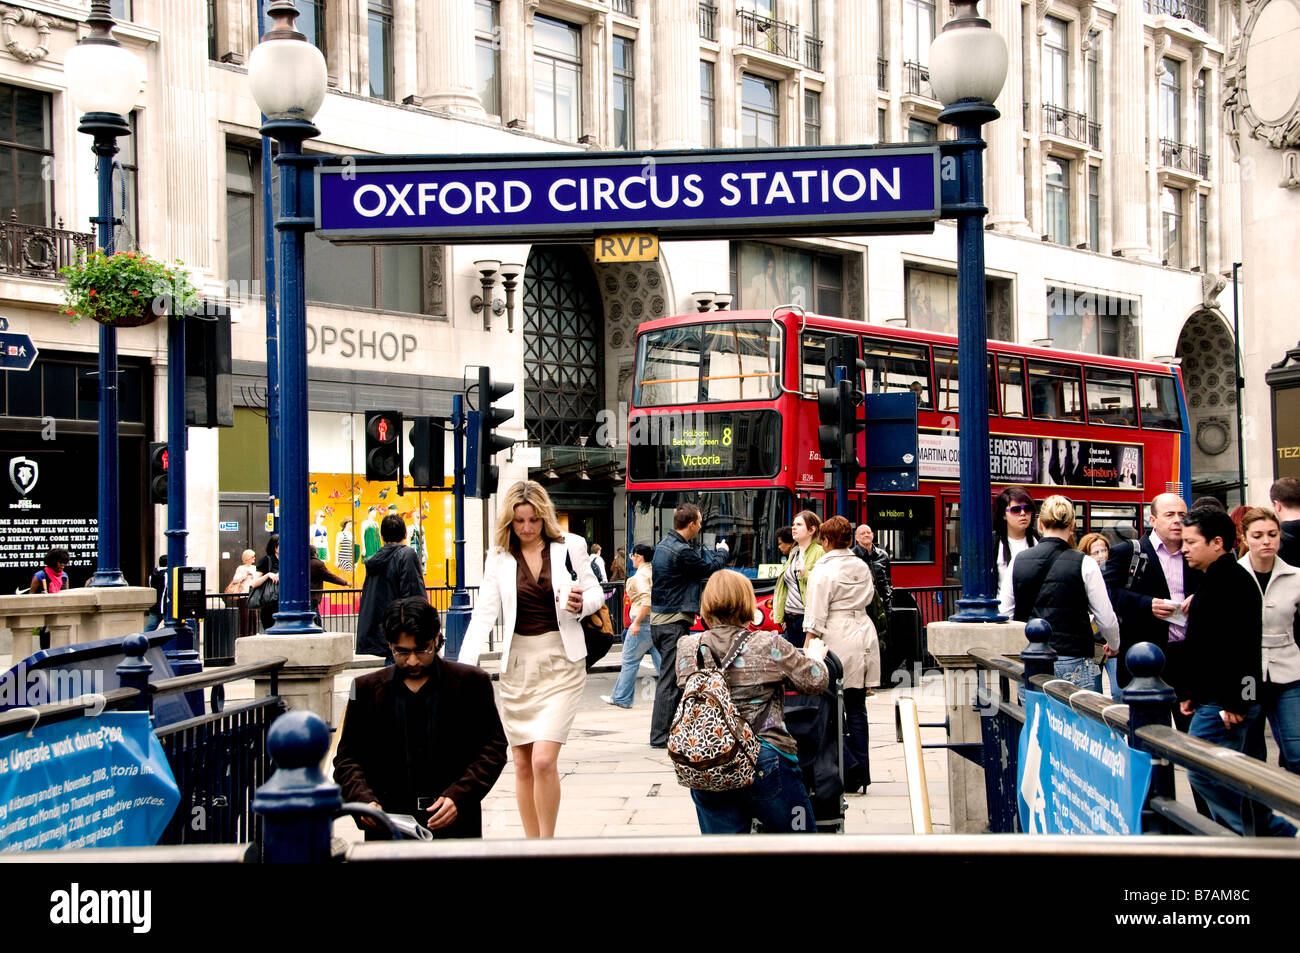 Oxford circus station bus people London Stock Photo